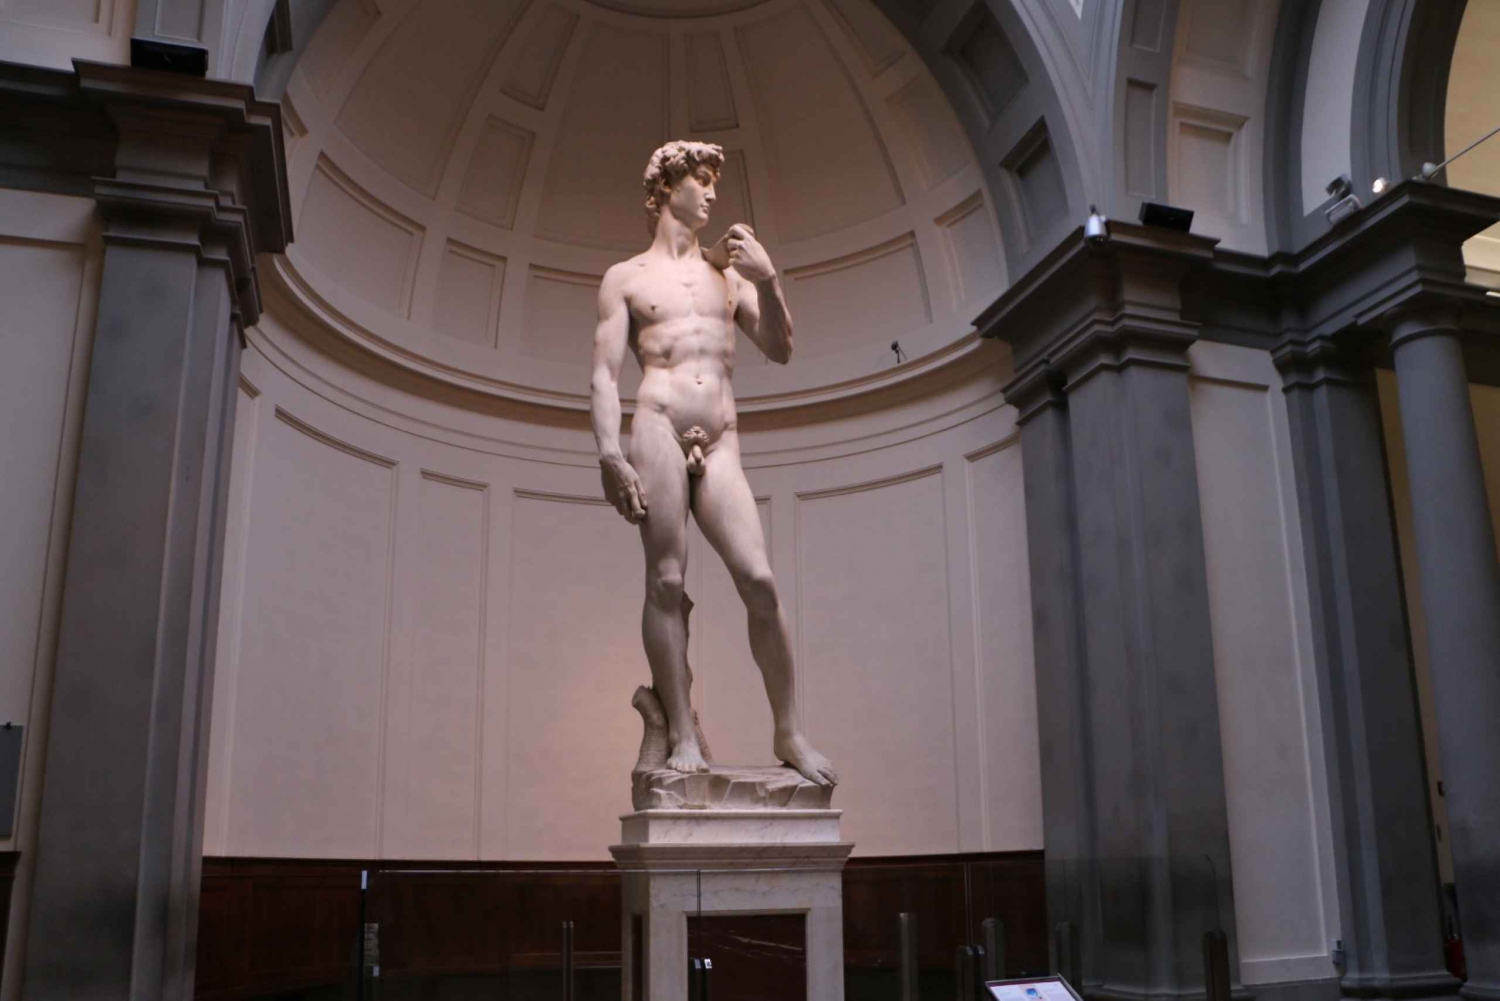 From Rome: Florence, Accademia Gallery, & Pisa Private Tour